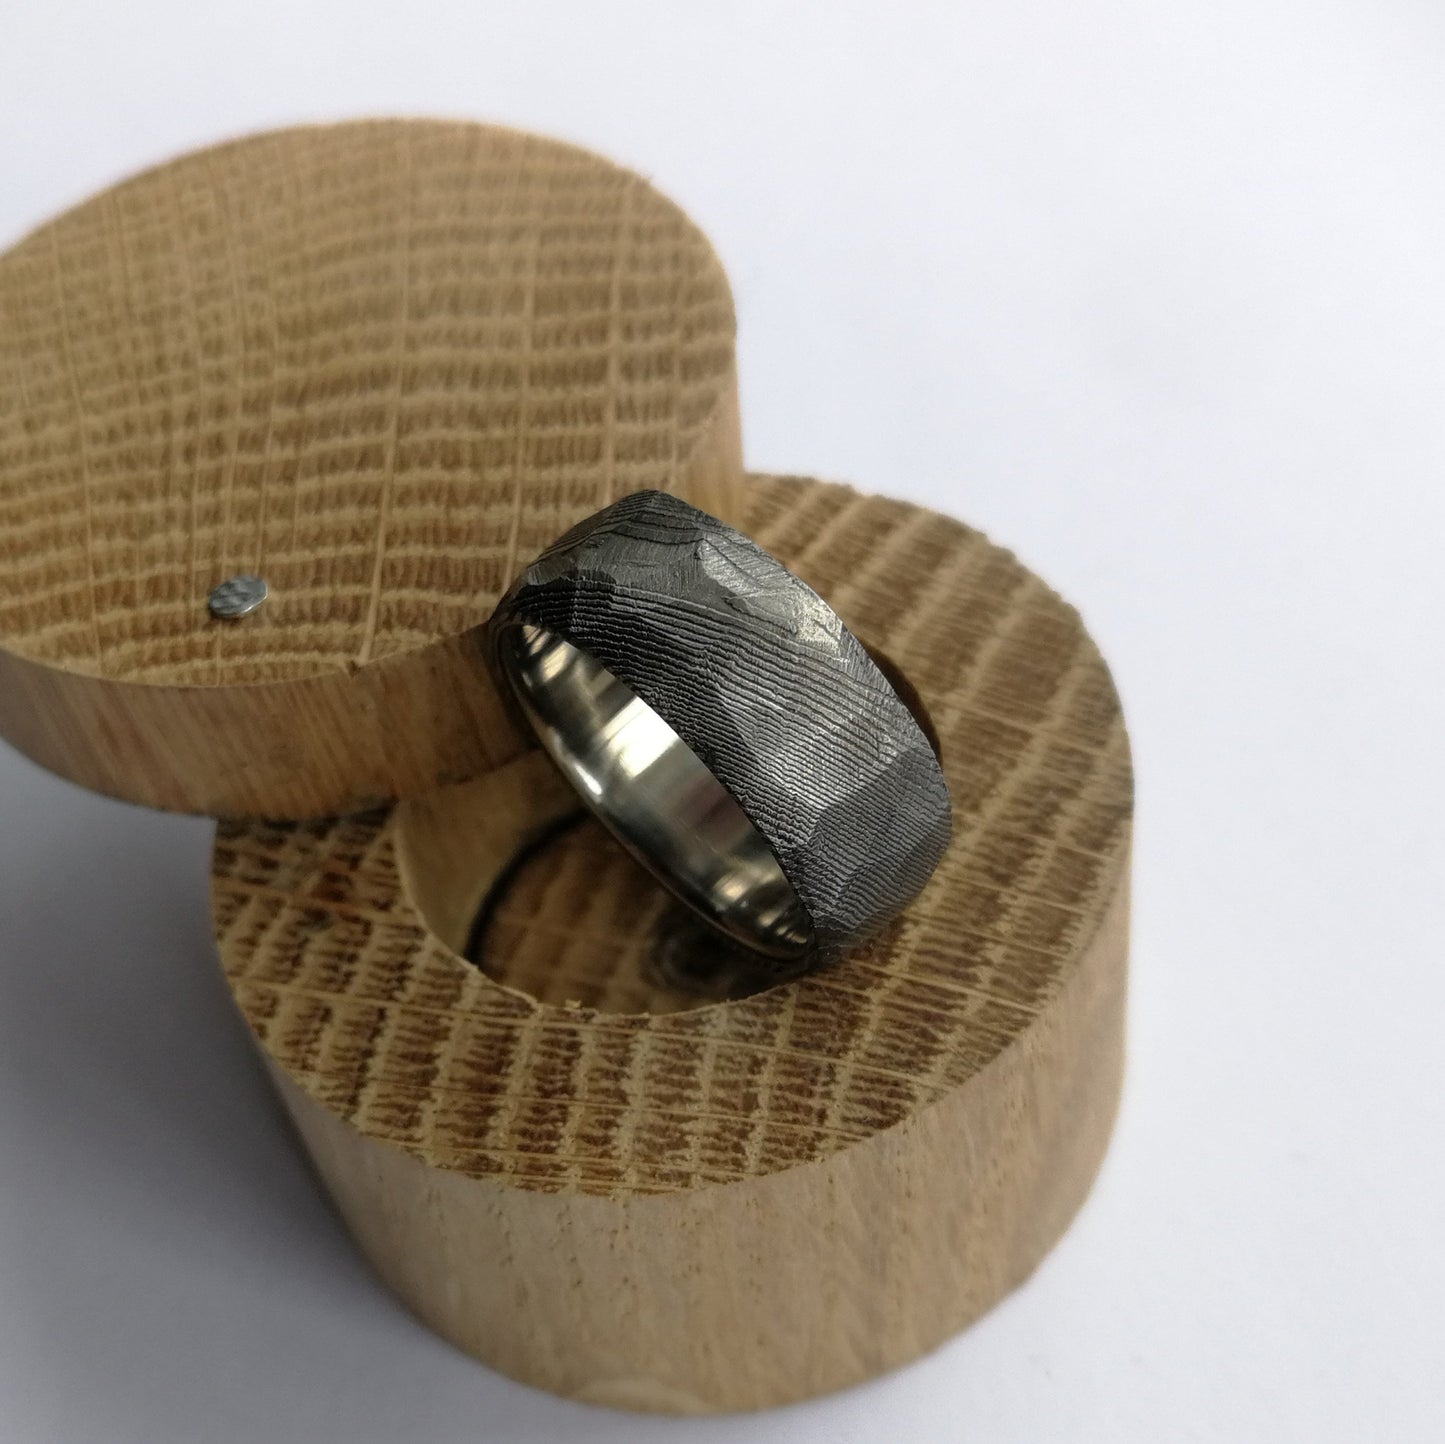 Unique Handmade Faceted Stainless Damascus Steel Ring with Polished Titanium Inner Lining.